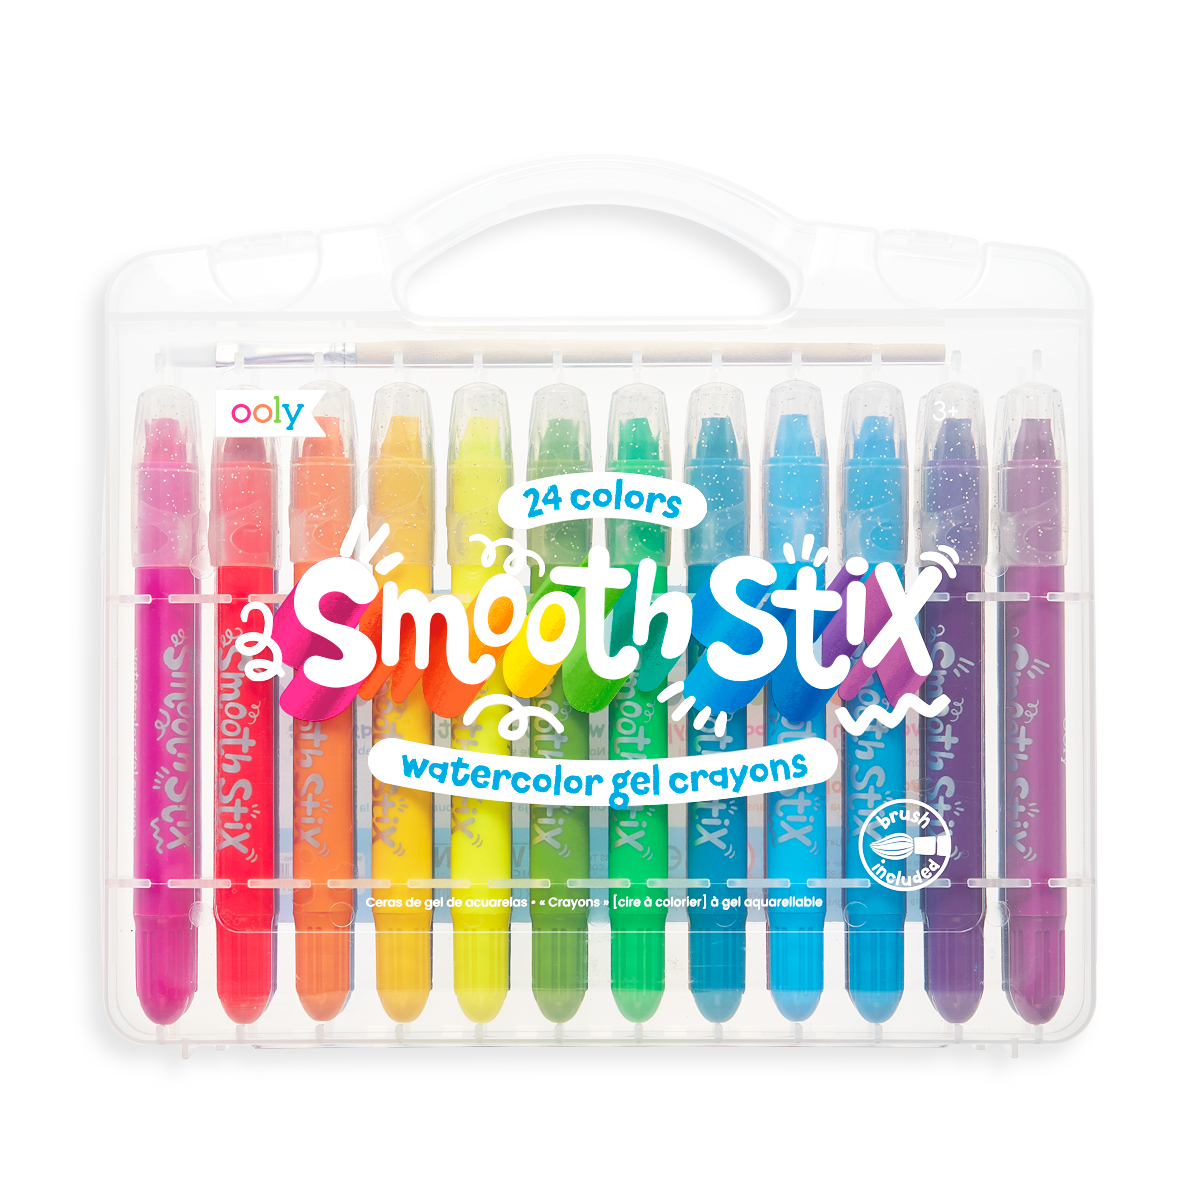 OOLY Smooth Stix Watercolor Gel Crayons - Set of 24 Watercolor Sets